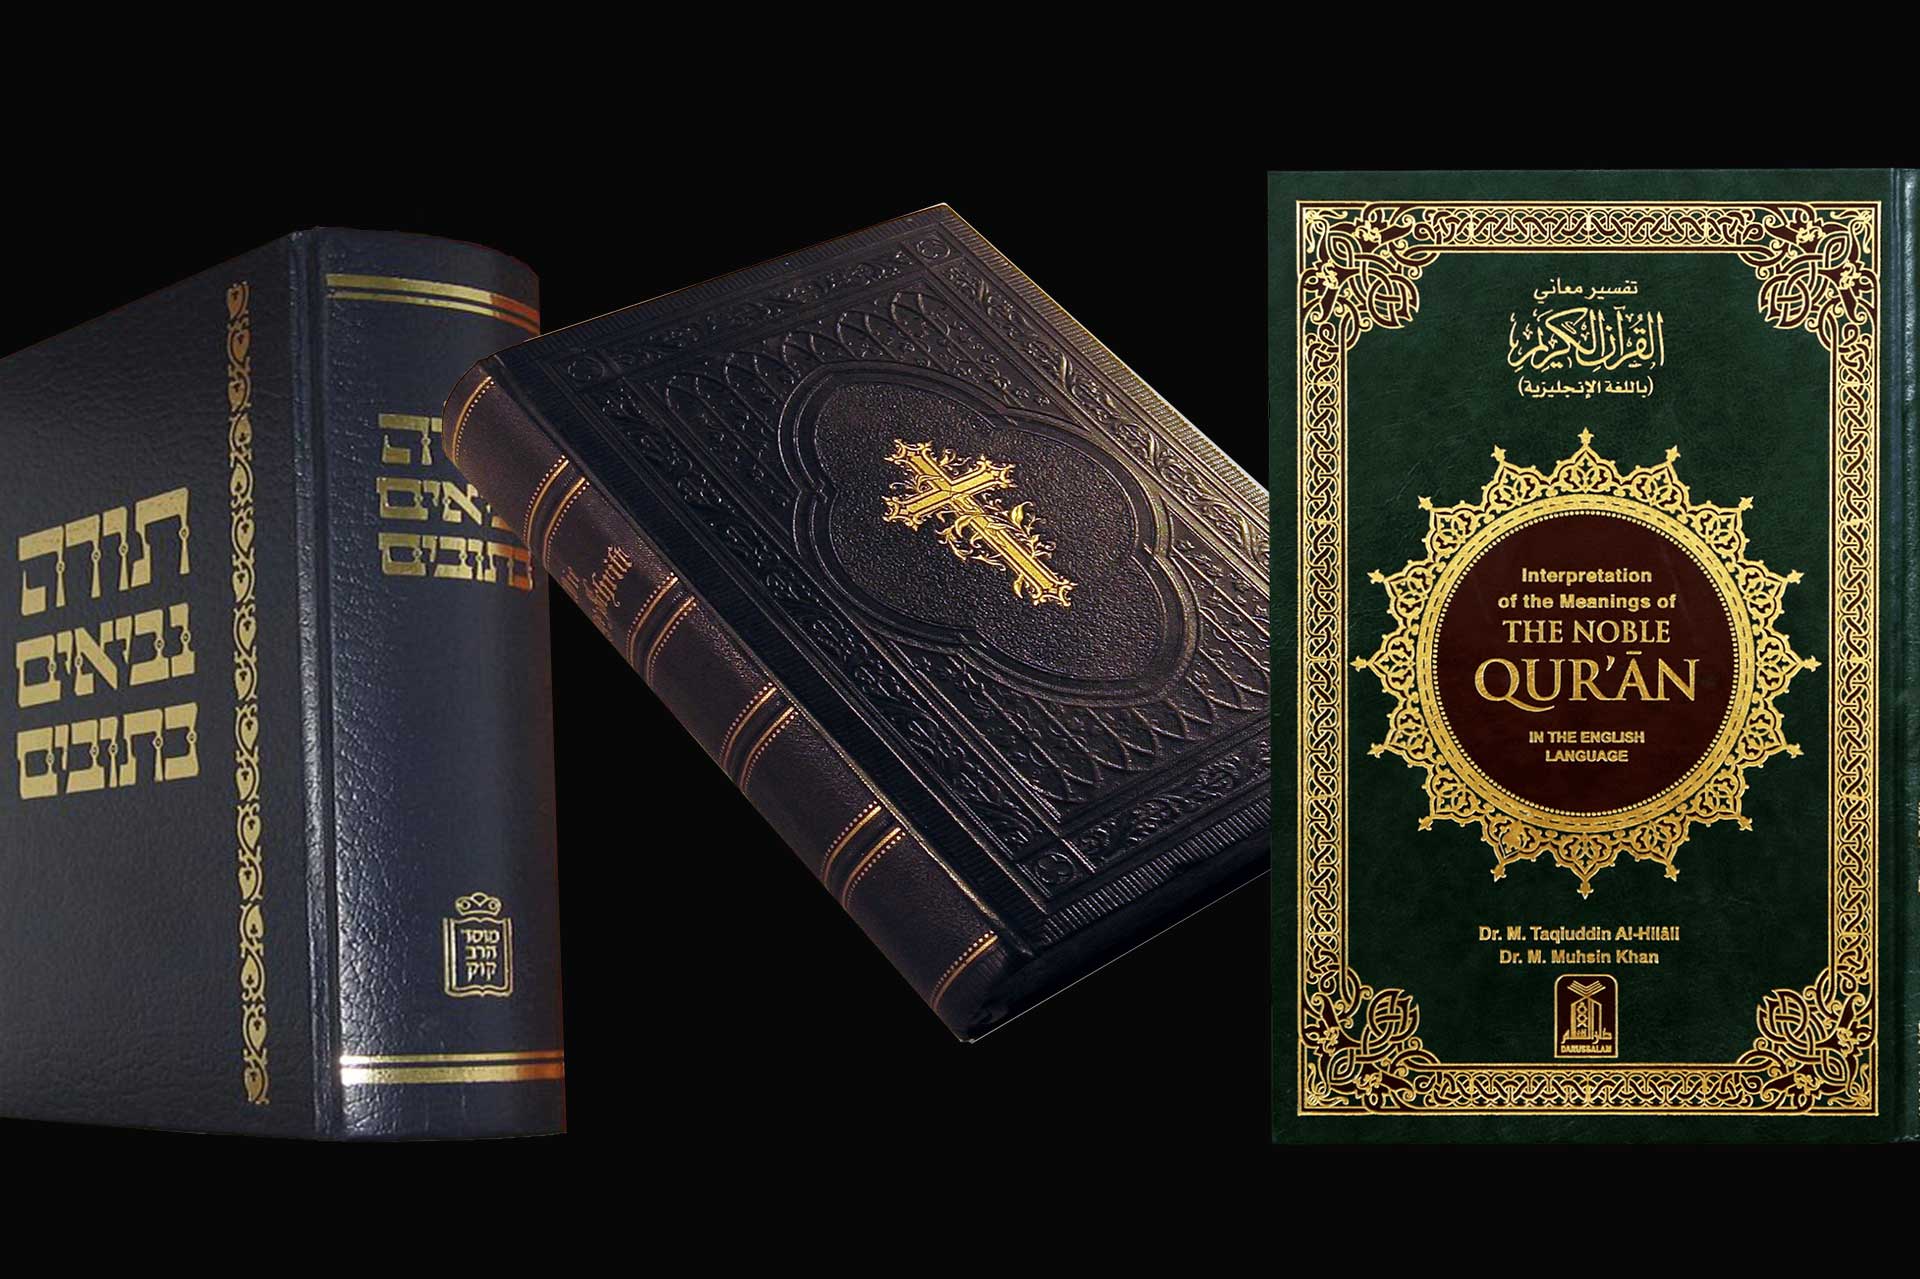 Similarities and Differences Between the Qur’an and Jewish and Christian Scriptures and Sources: What Do They Really Mean?